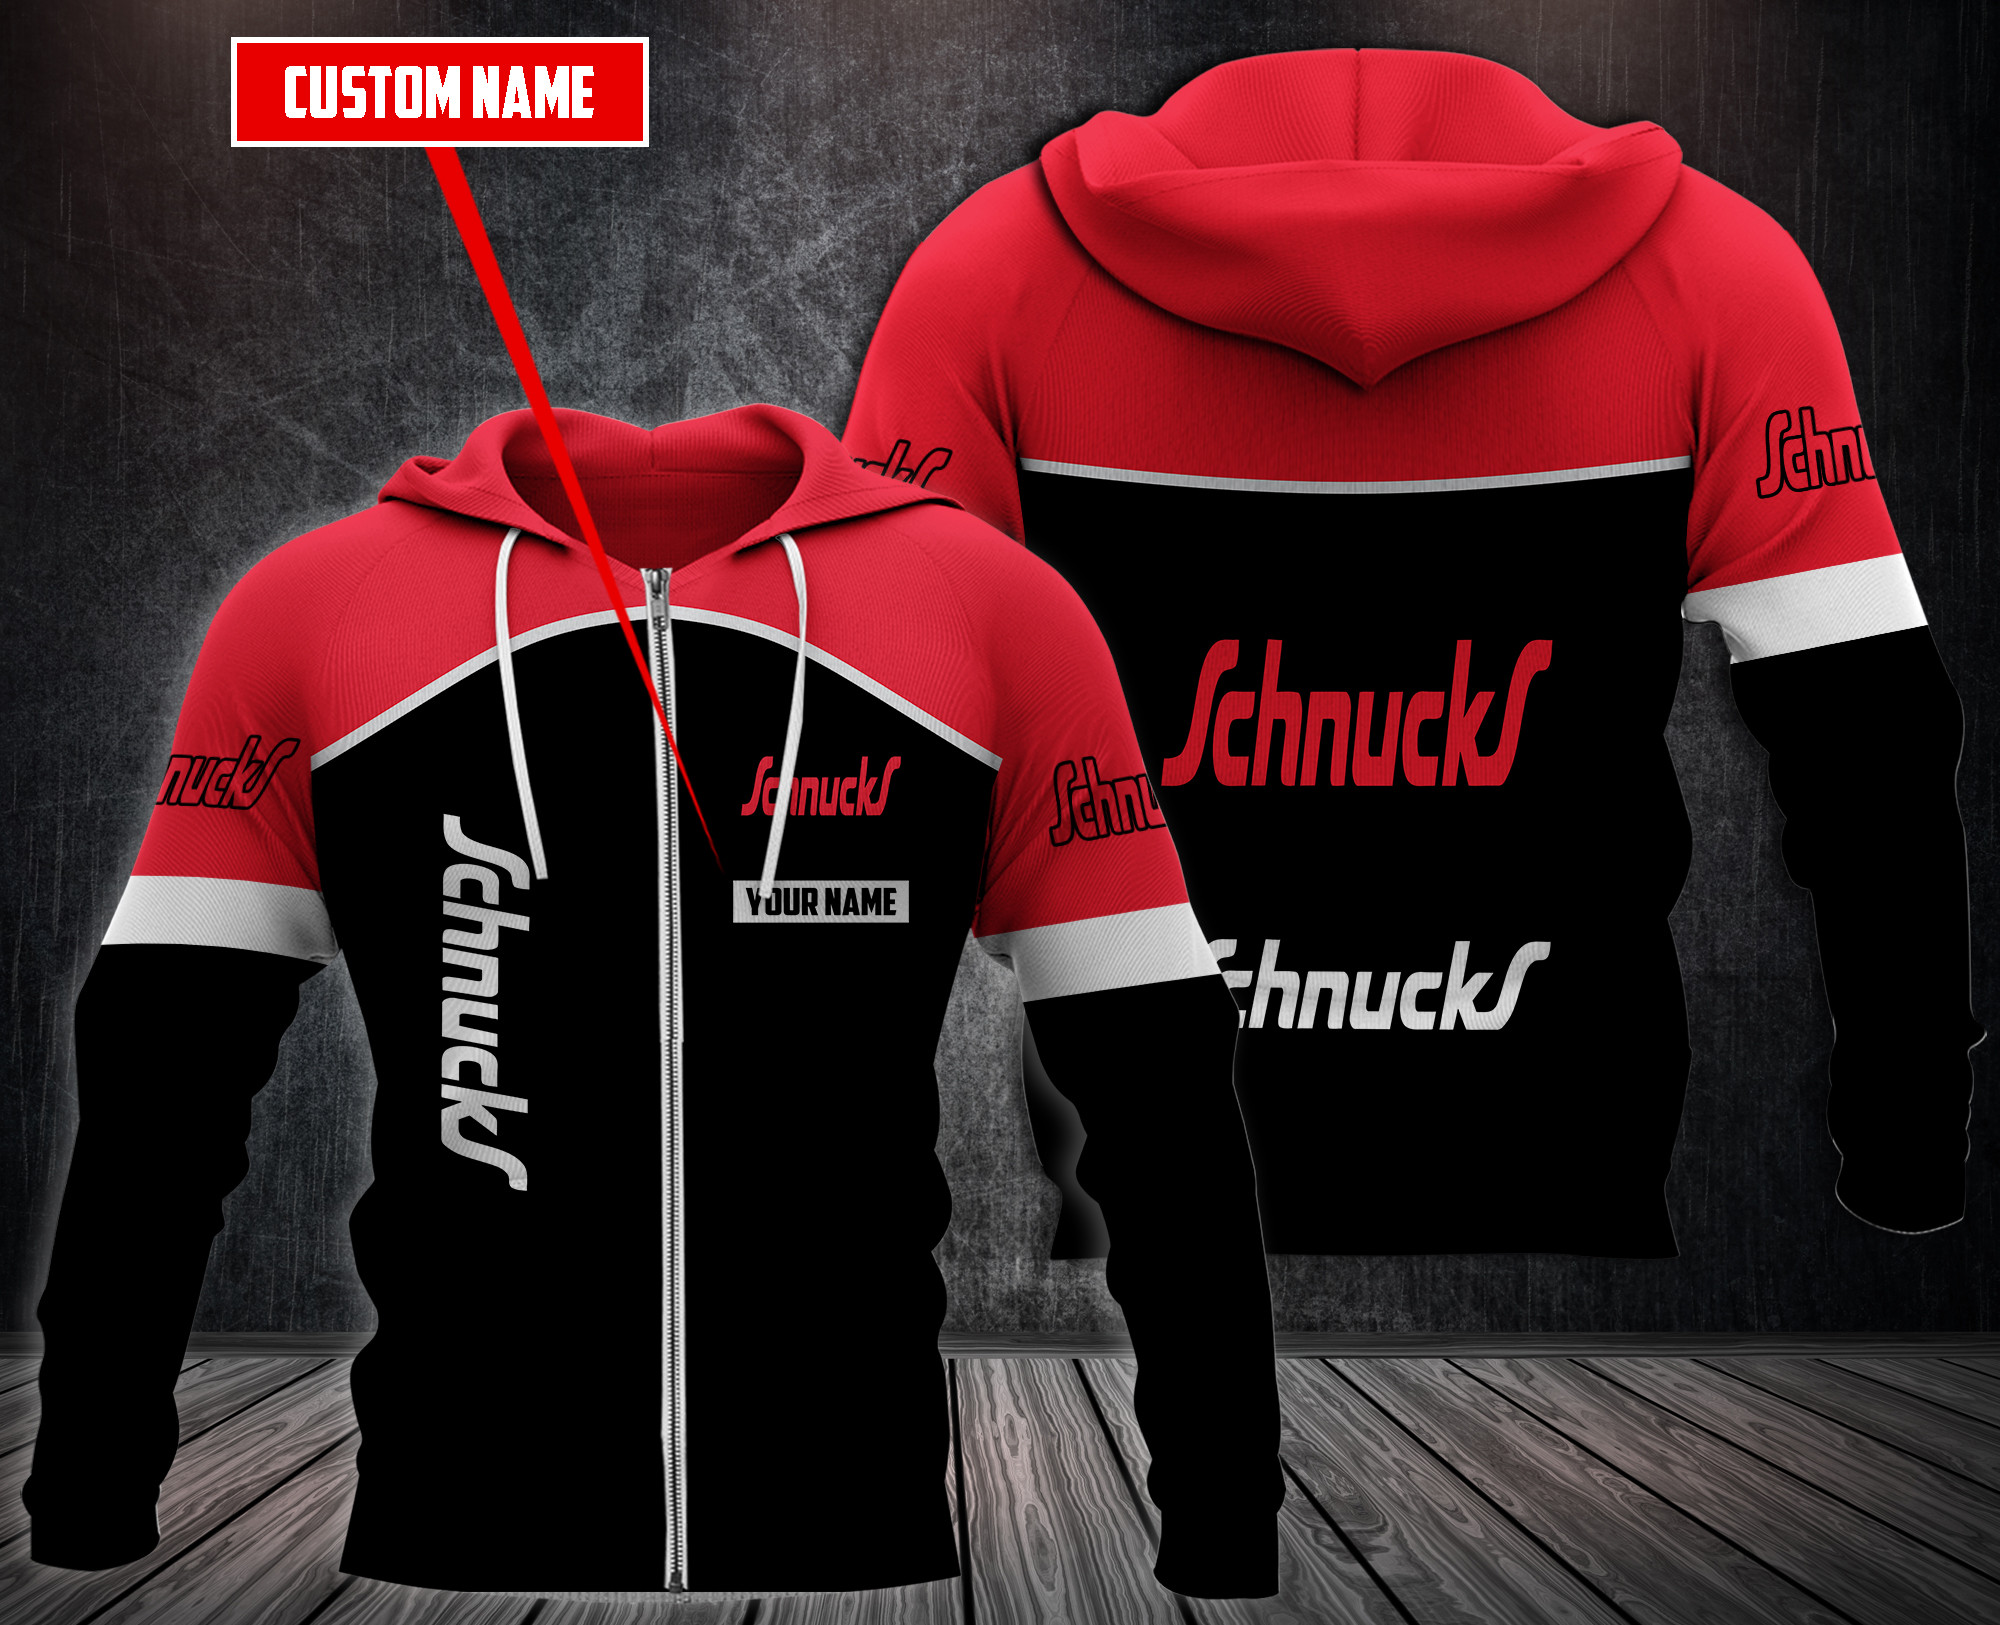 Choose the right hoodies for you on our boxboxshirt and ethershirt websites in 2022 71